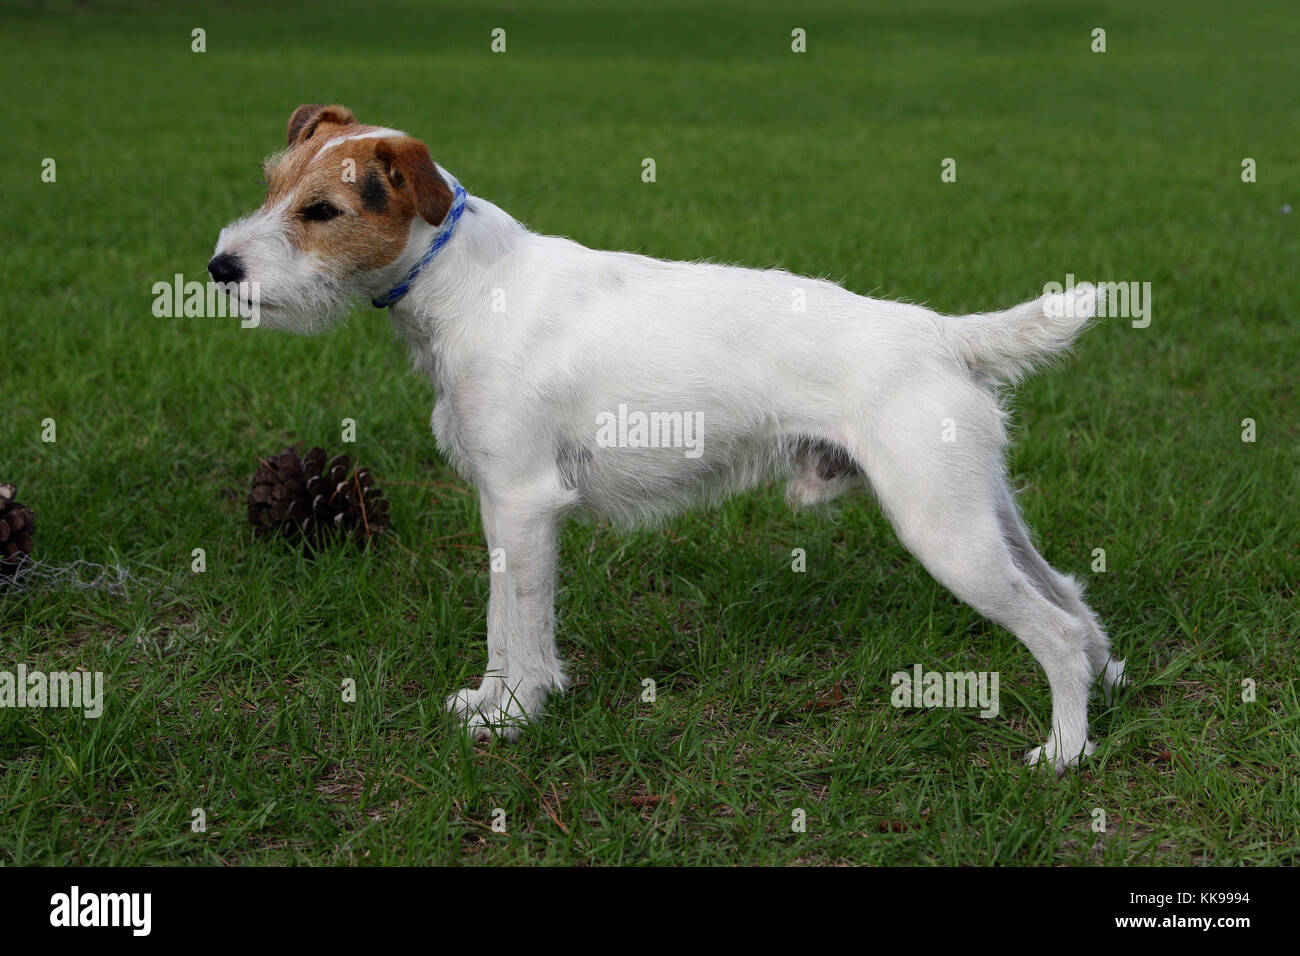 Terrier - Parson Jack Russell Parson Jack Russell Terrier Broken haired Stock Photo